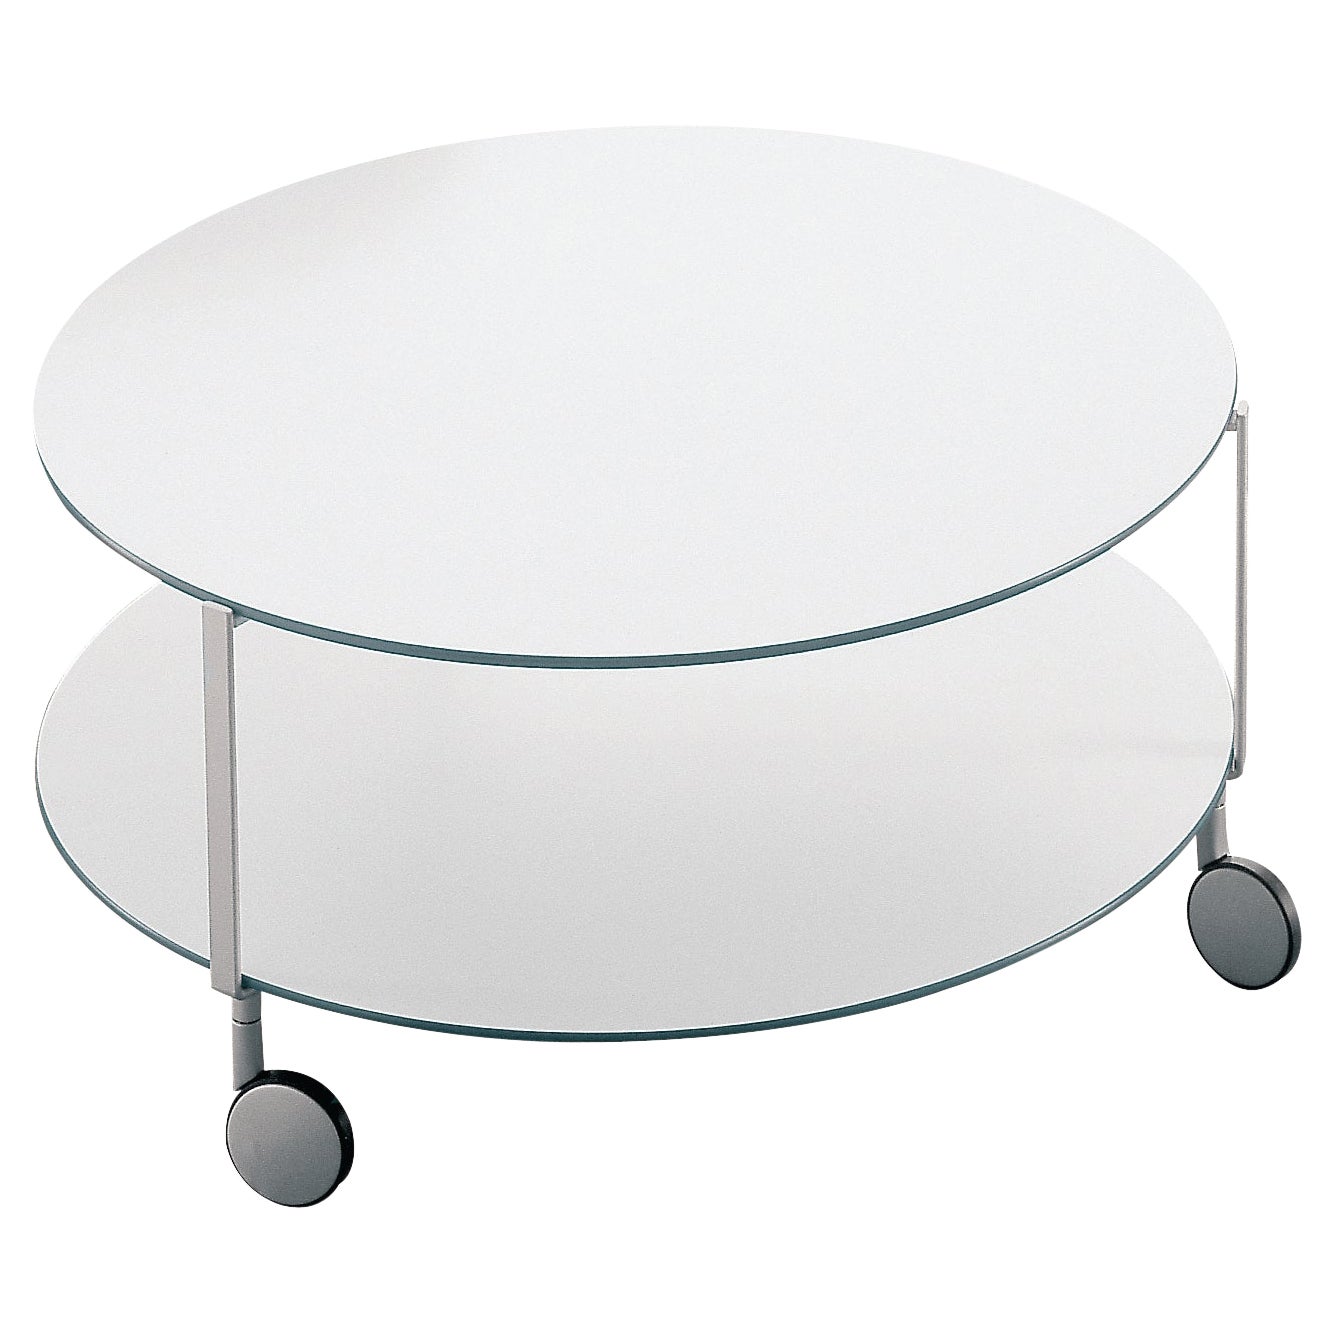 Zanotta Giro' Castor-Mounted Medium Table with White Plastic Top by Anna Deplano For Sale